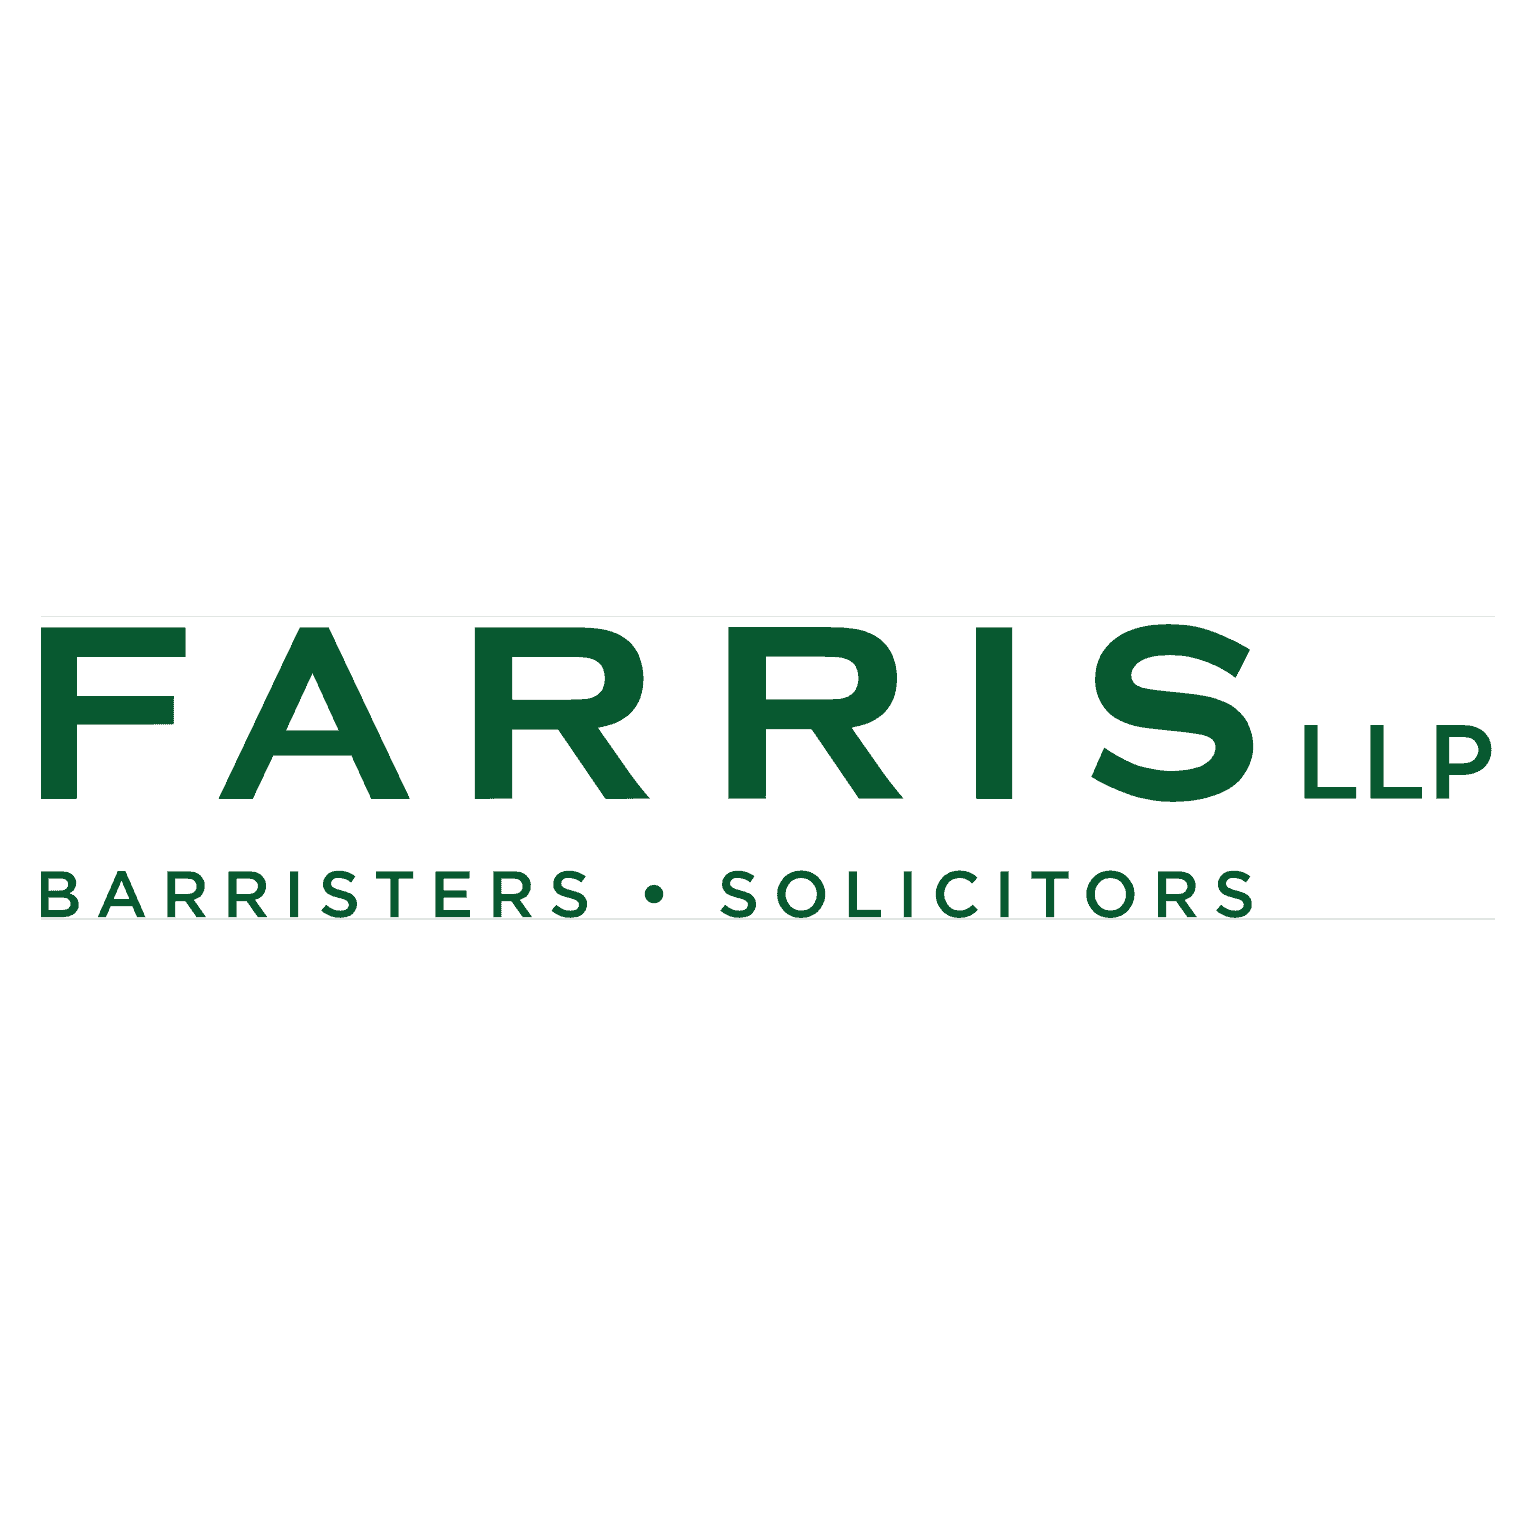 <p><strong style="color: rgb(0, 0, 0);">Farris LLP</strong></p> logo